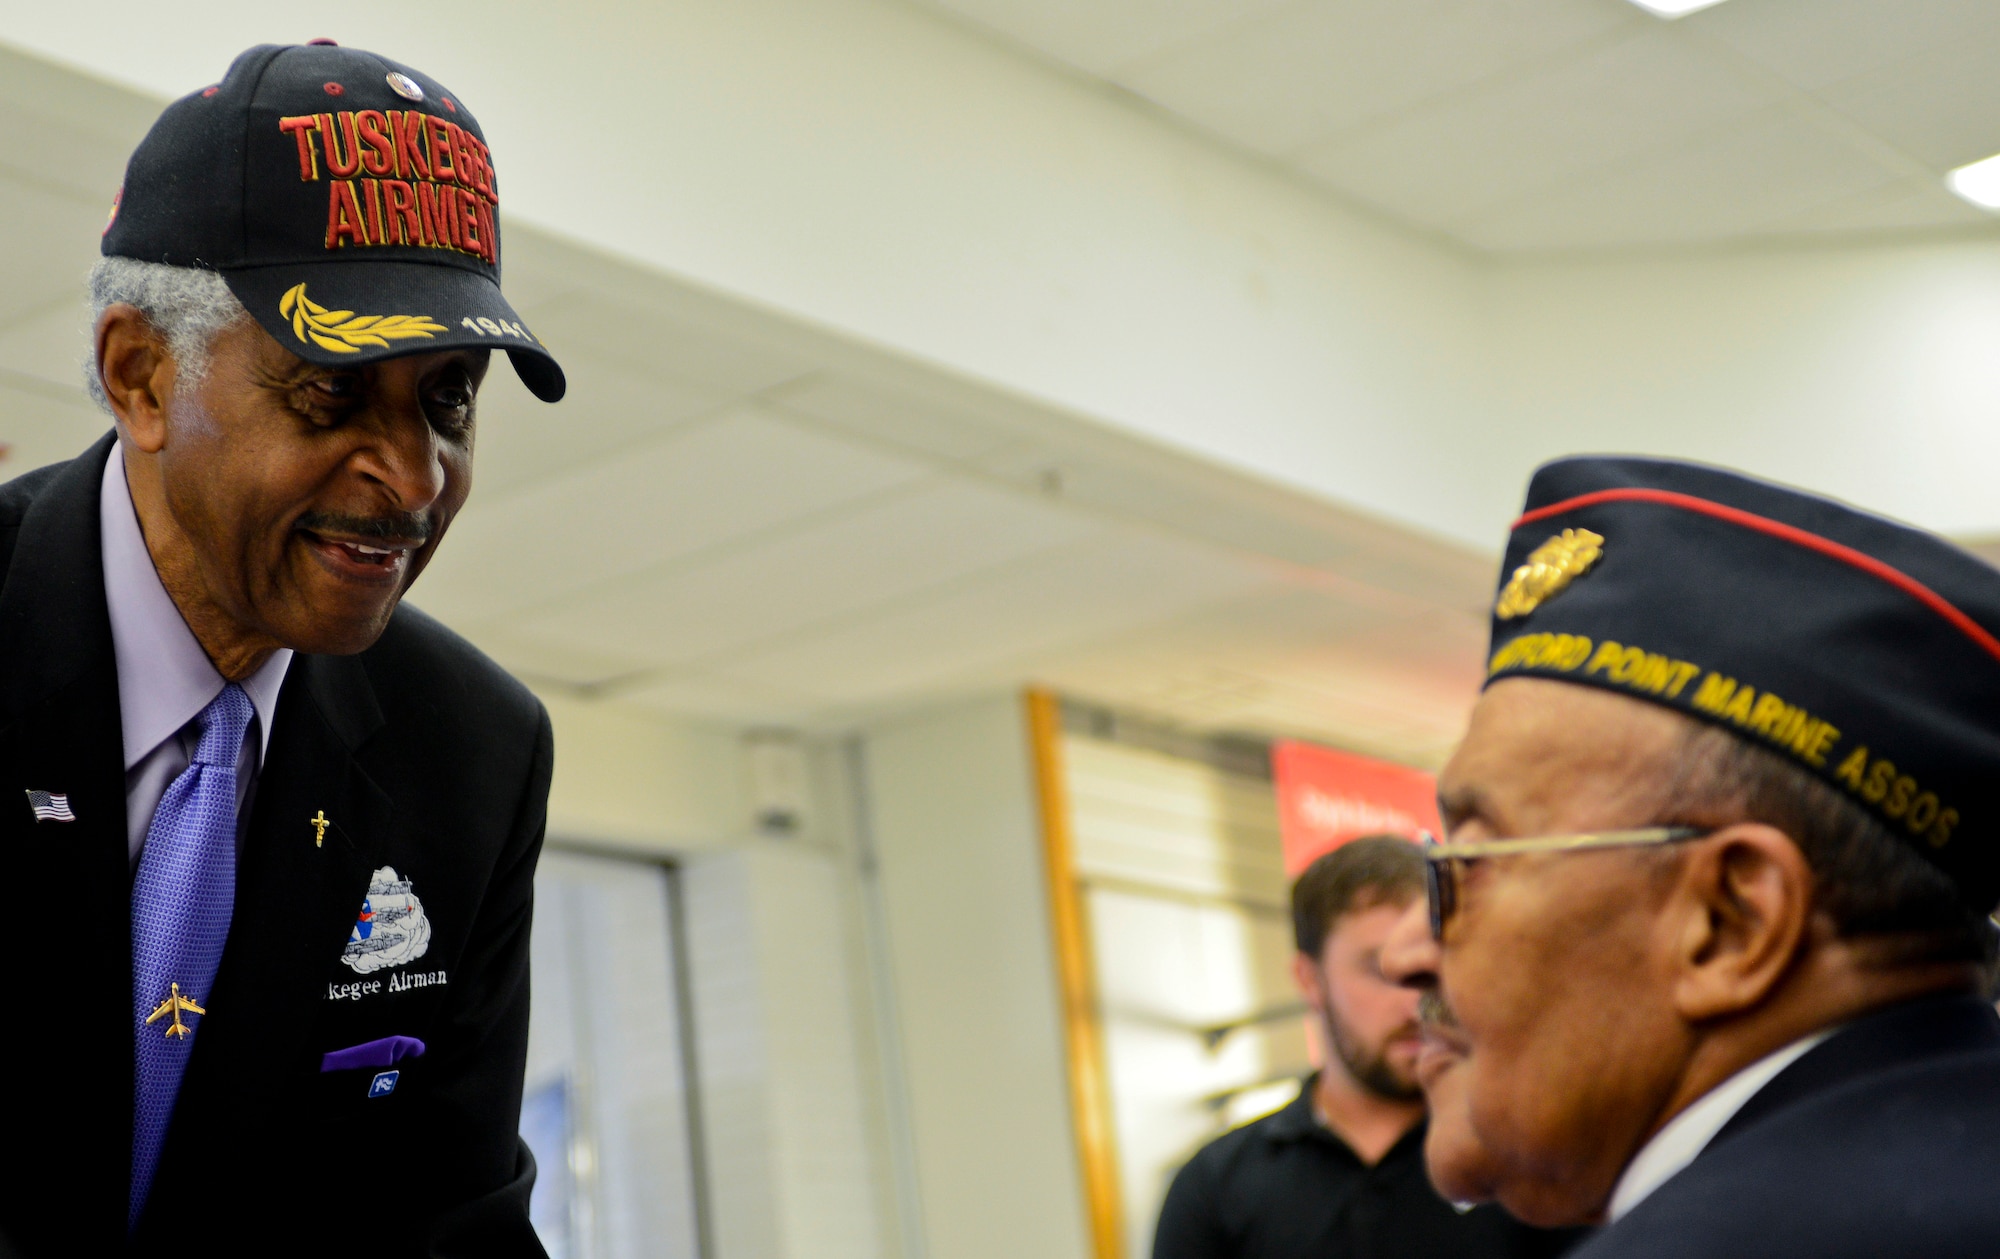 Ezra M. Hill, a Tuskegee Airman, speaks with Charles Norman, a Montford Point Marine, at the Exchange at Langley Air Force Base Va., July 2, 2013. Like the Tuskegee Airmen, the Montford Point Marines are considered trail blazers who broke the color barrier in the military, as they were the first African-American Marines trained at the segregated Camp Montford Point, N.C. (U.S. Air Force photo by Airman 1st Class R. Alex Durbin/Released)